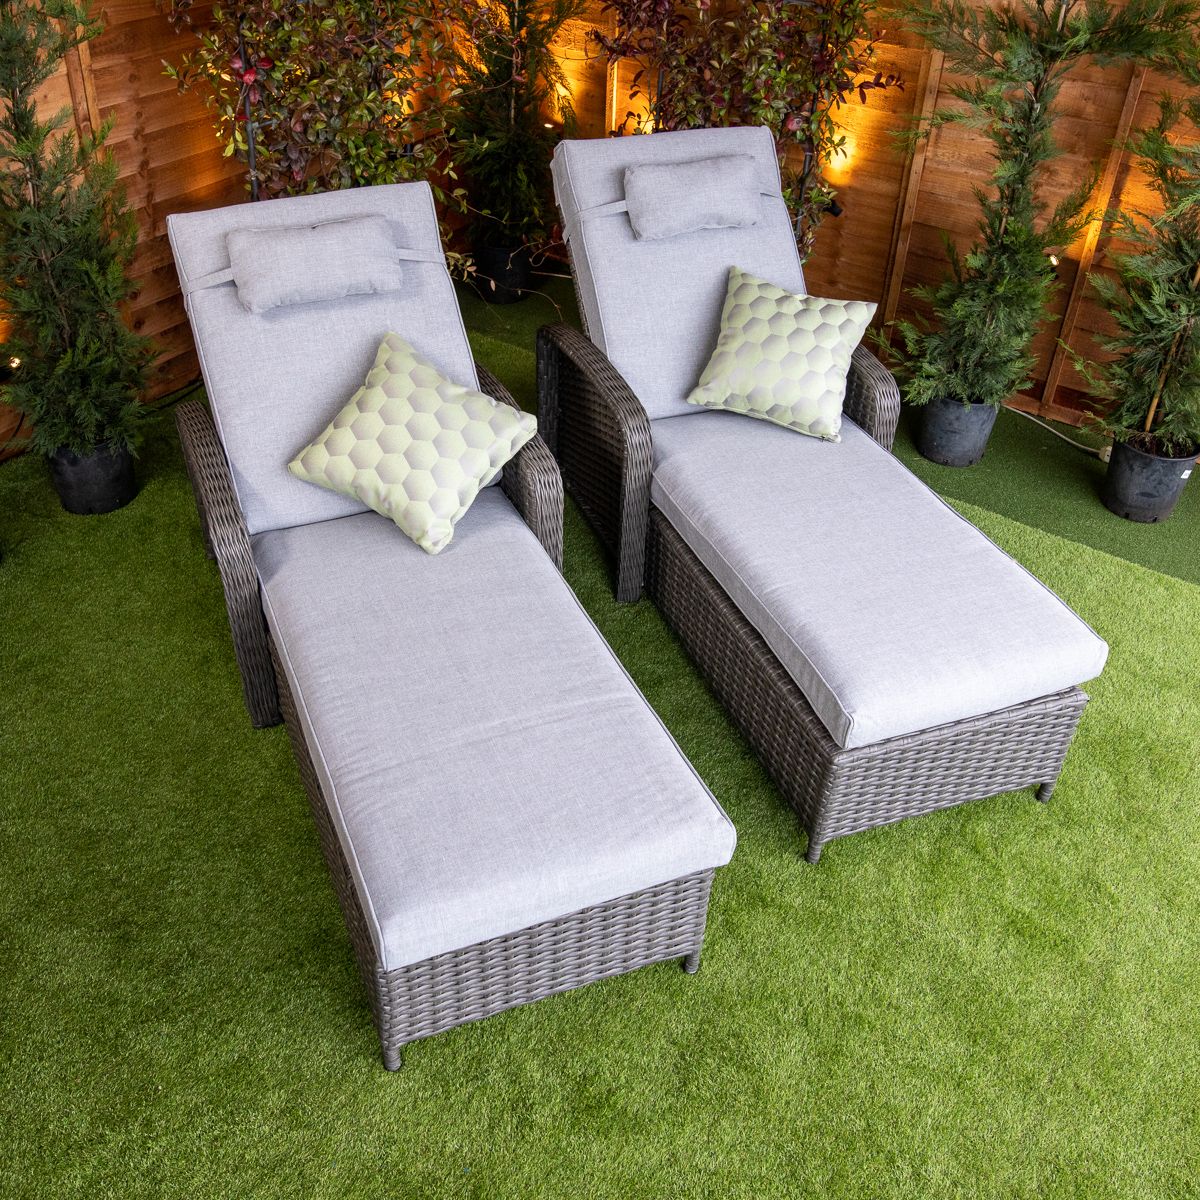 Platinum Venice Wheeled loungers With Arms set of 2